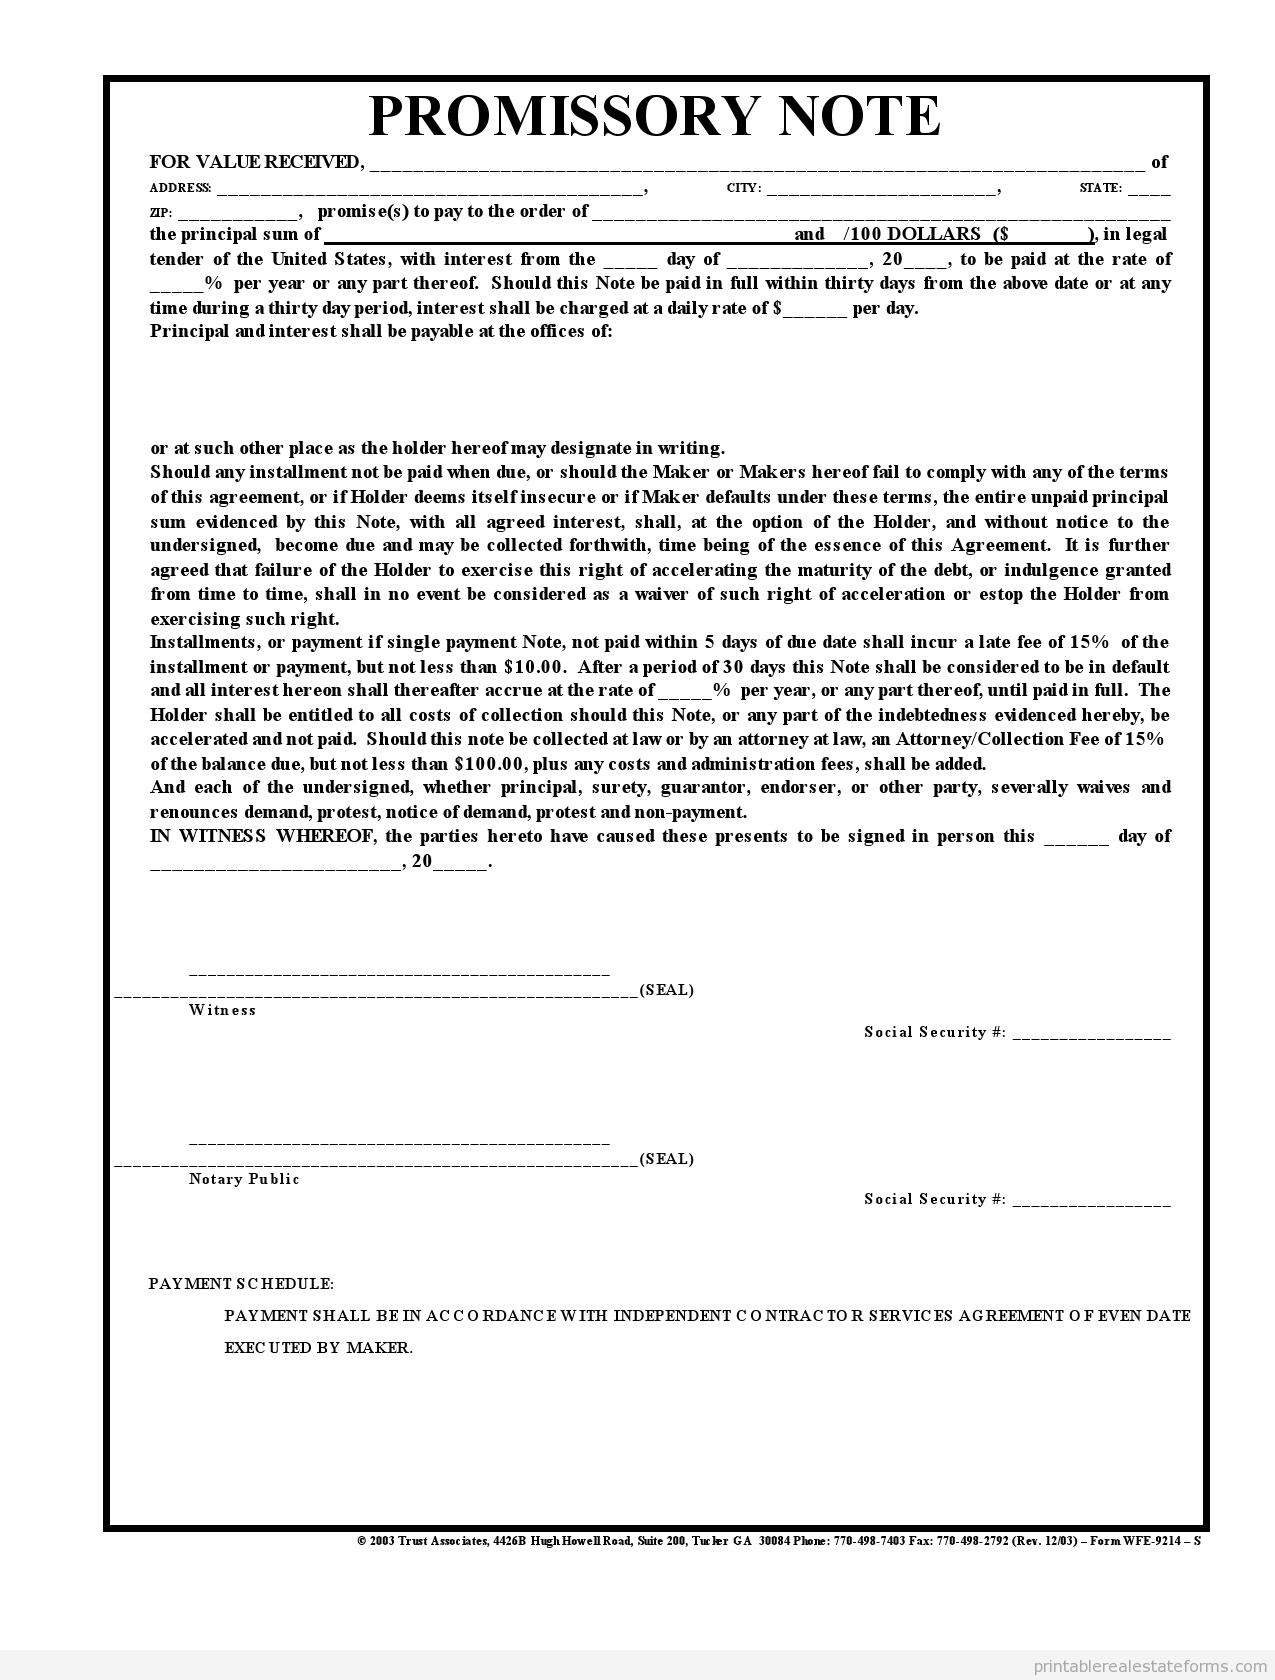 Sample Printable Promissory Note Credit Scedule Form | Sample Real - Free Printable Promissory Note Contract